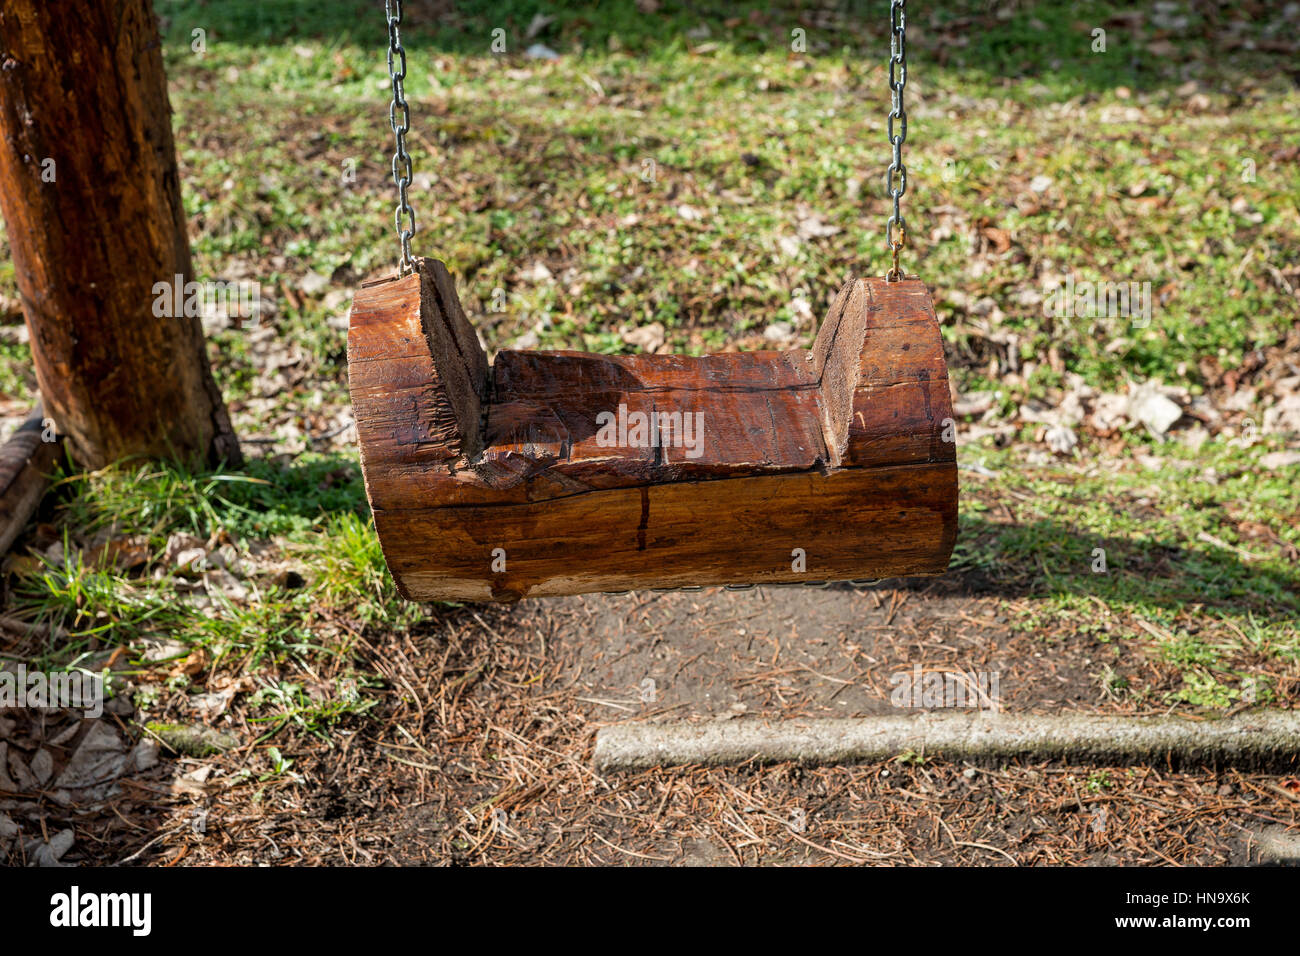 The seat of a swing made of tree trunks hung on chains Stock Photo